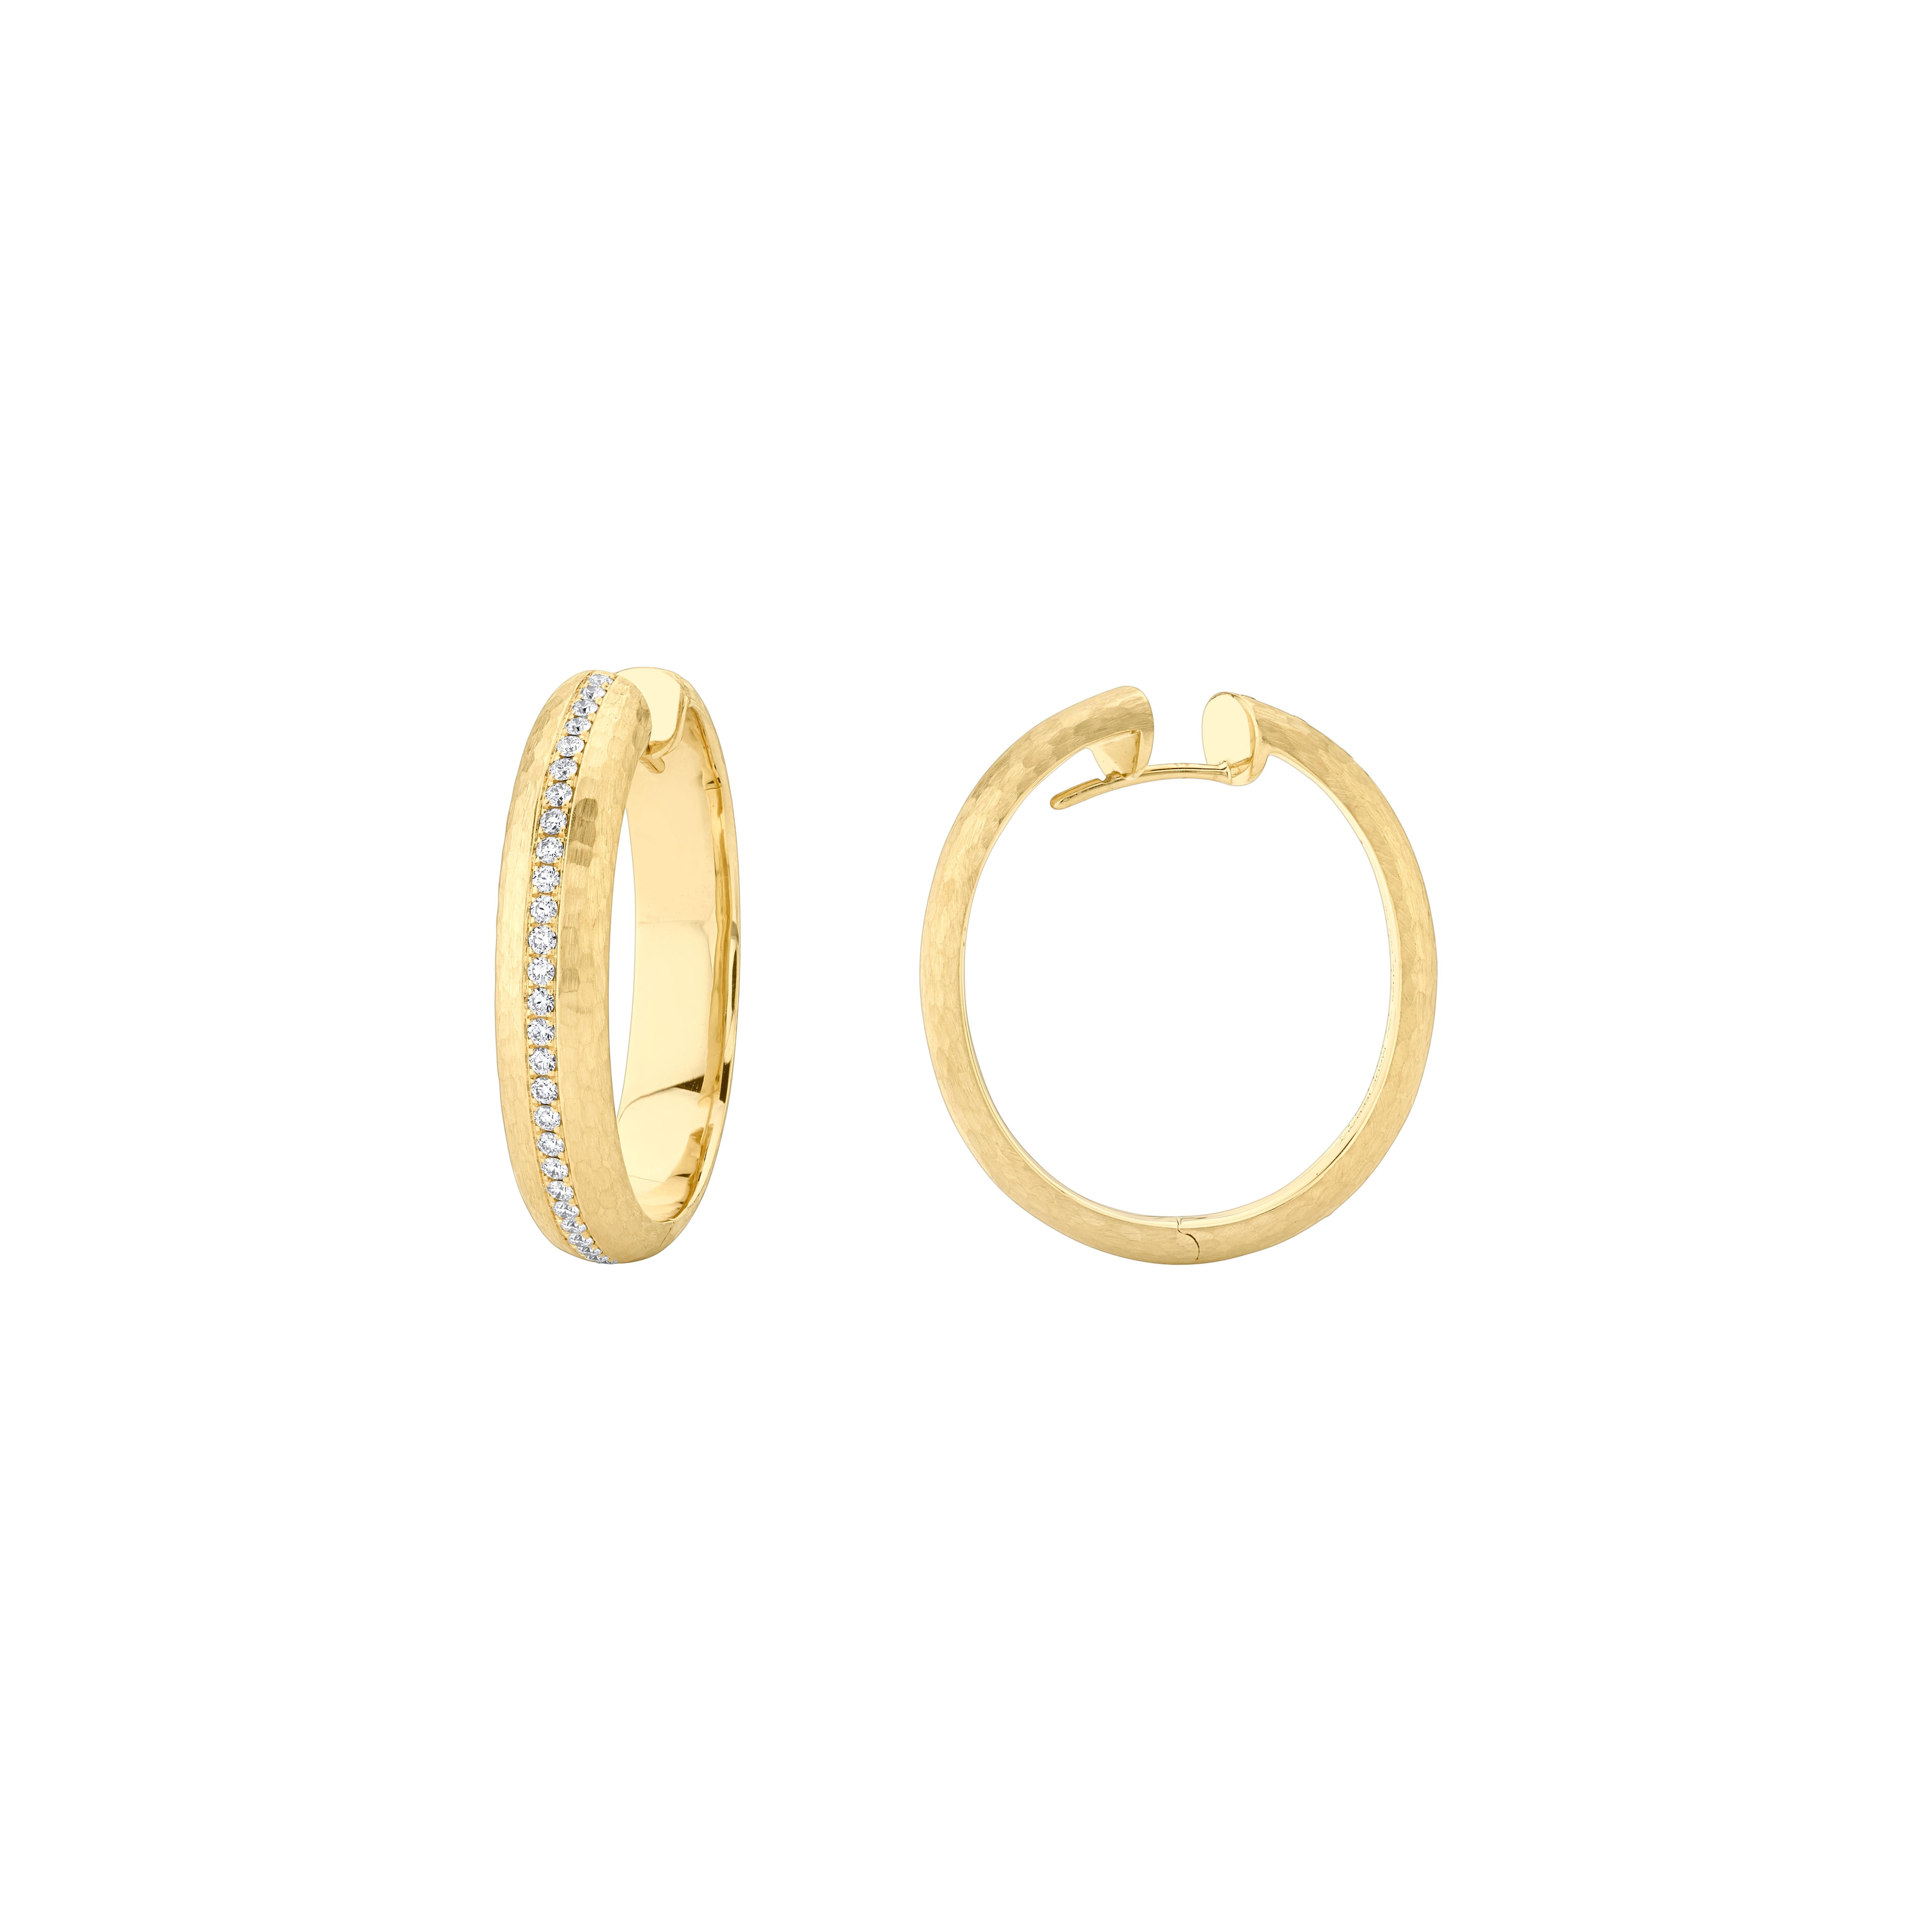 Style #: XH25H.
SYLVIA KONTENTE  18K Yellow gold diamond hoop earrings with hammered finish.
Precision-cut, round brilliant diamonds.
Diamond total weight: 0.49ct tw.
Diamond color/clarity: DEF/VVS VS.
Hammered finish.
High-end construction.
Size: